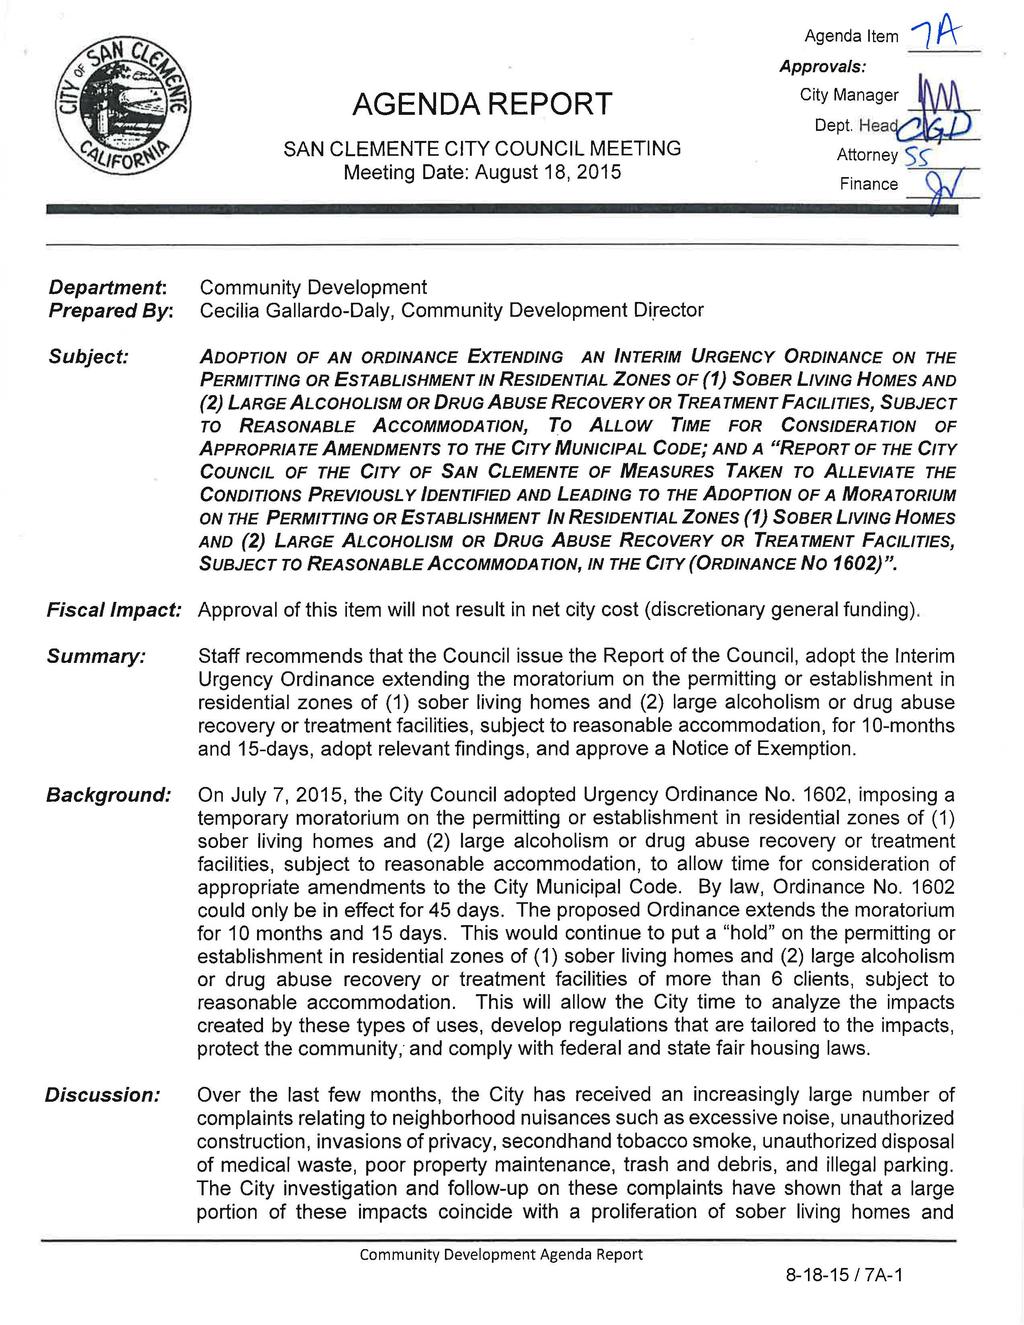 Agenda Item 1 A: AGENDA REPORT SAN CLEMENTE CITY COUNCIL MEETING Meeting Date: August 18, 2015 Approvals: City Manager ~ Dept. Hea~ Attorney Sr Finance '-=-,w,--.